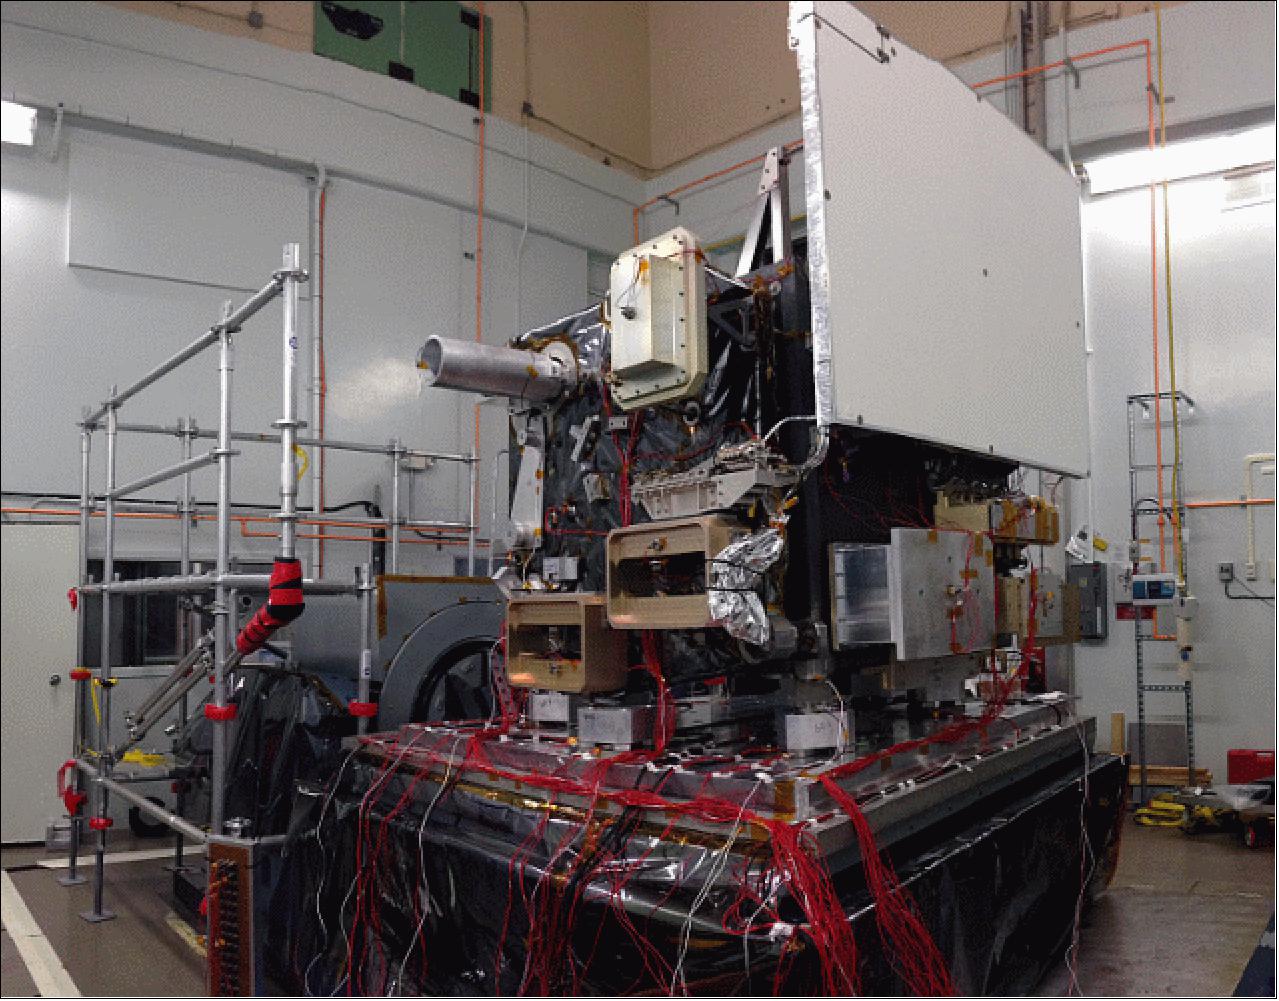 Figure 66: The ATLAS box structure, in preparation for its vibration tests at NASA/GSFC, which will ensure the box can withstand the jolts of launch (image credit: NASA, Ref. 77)